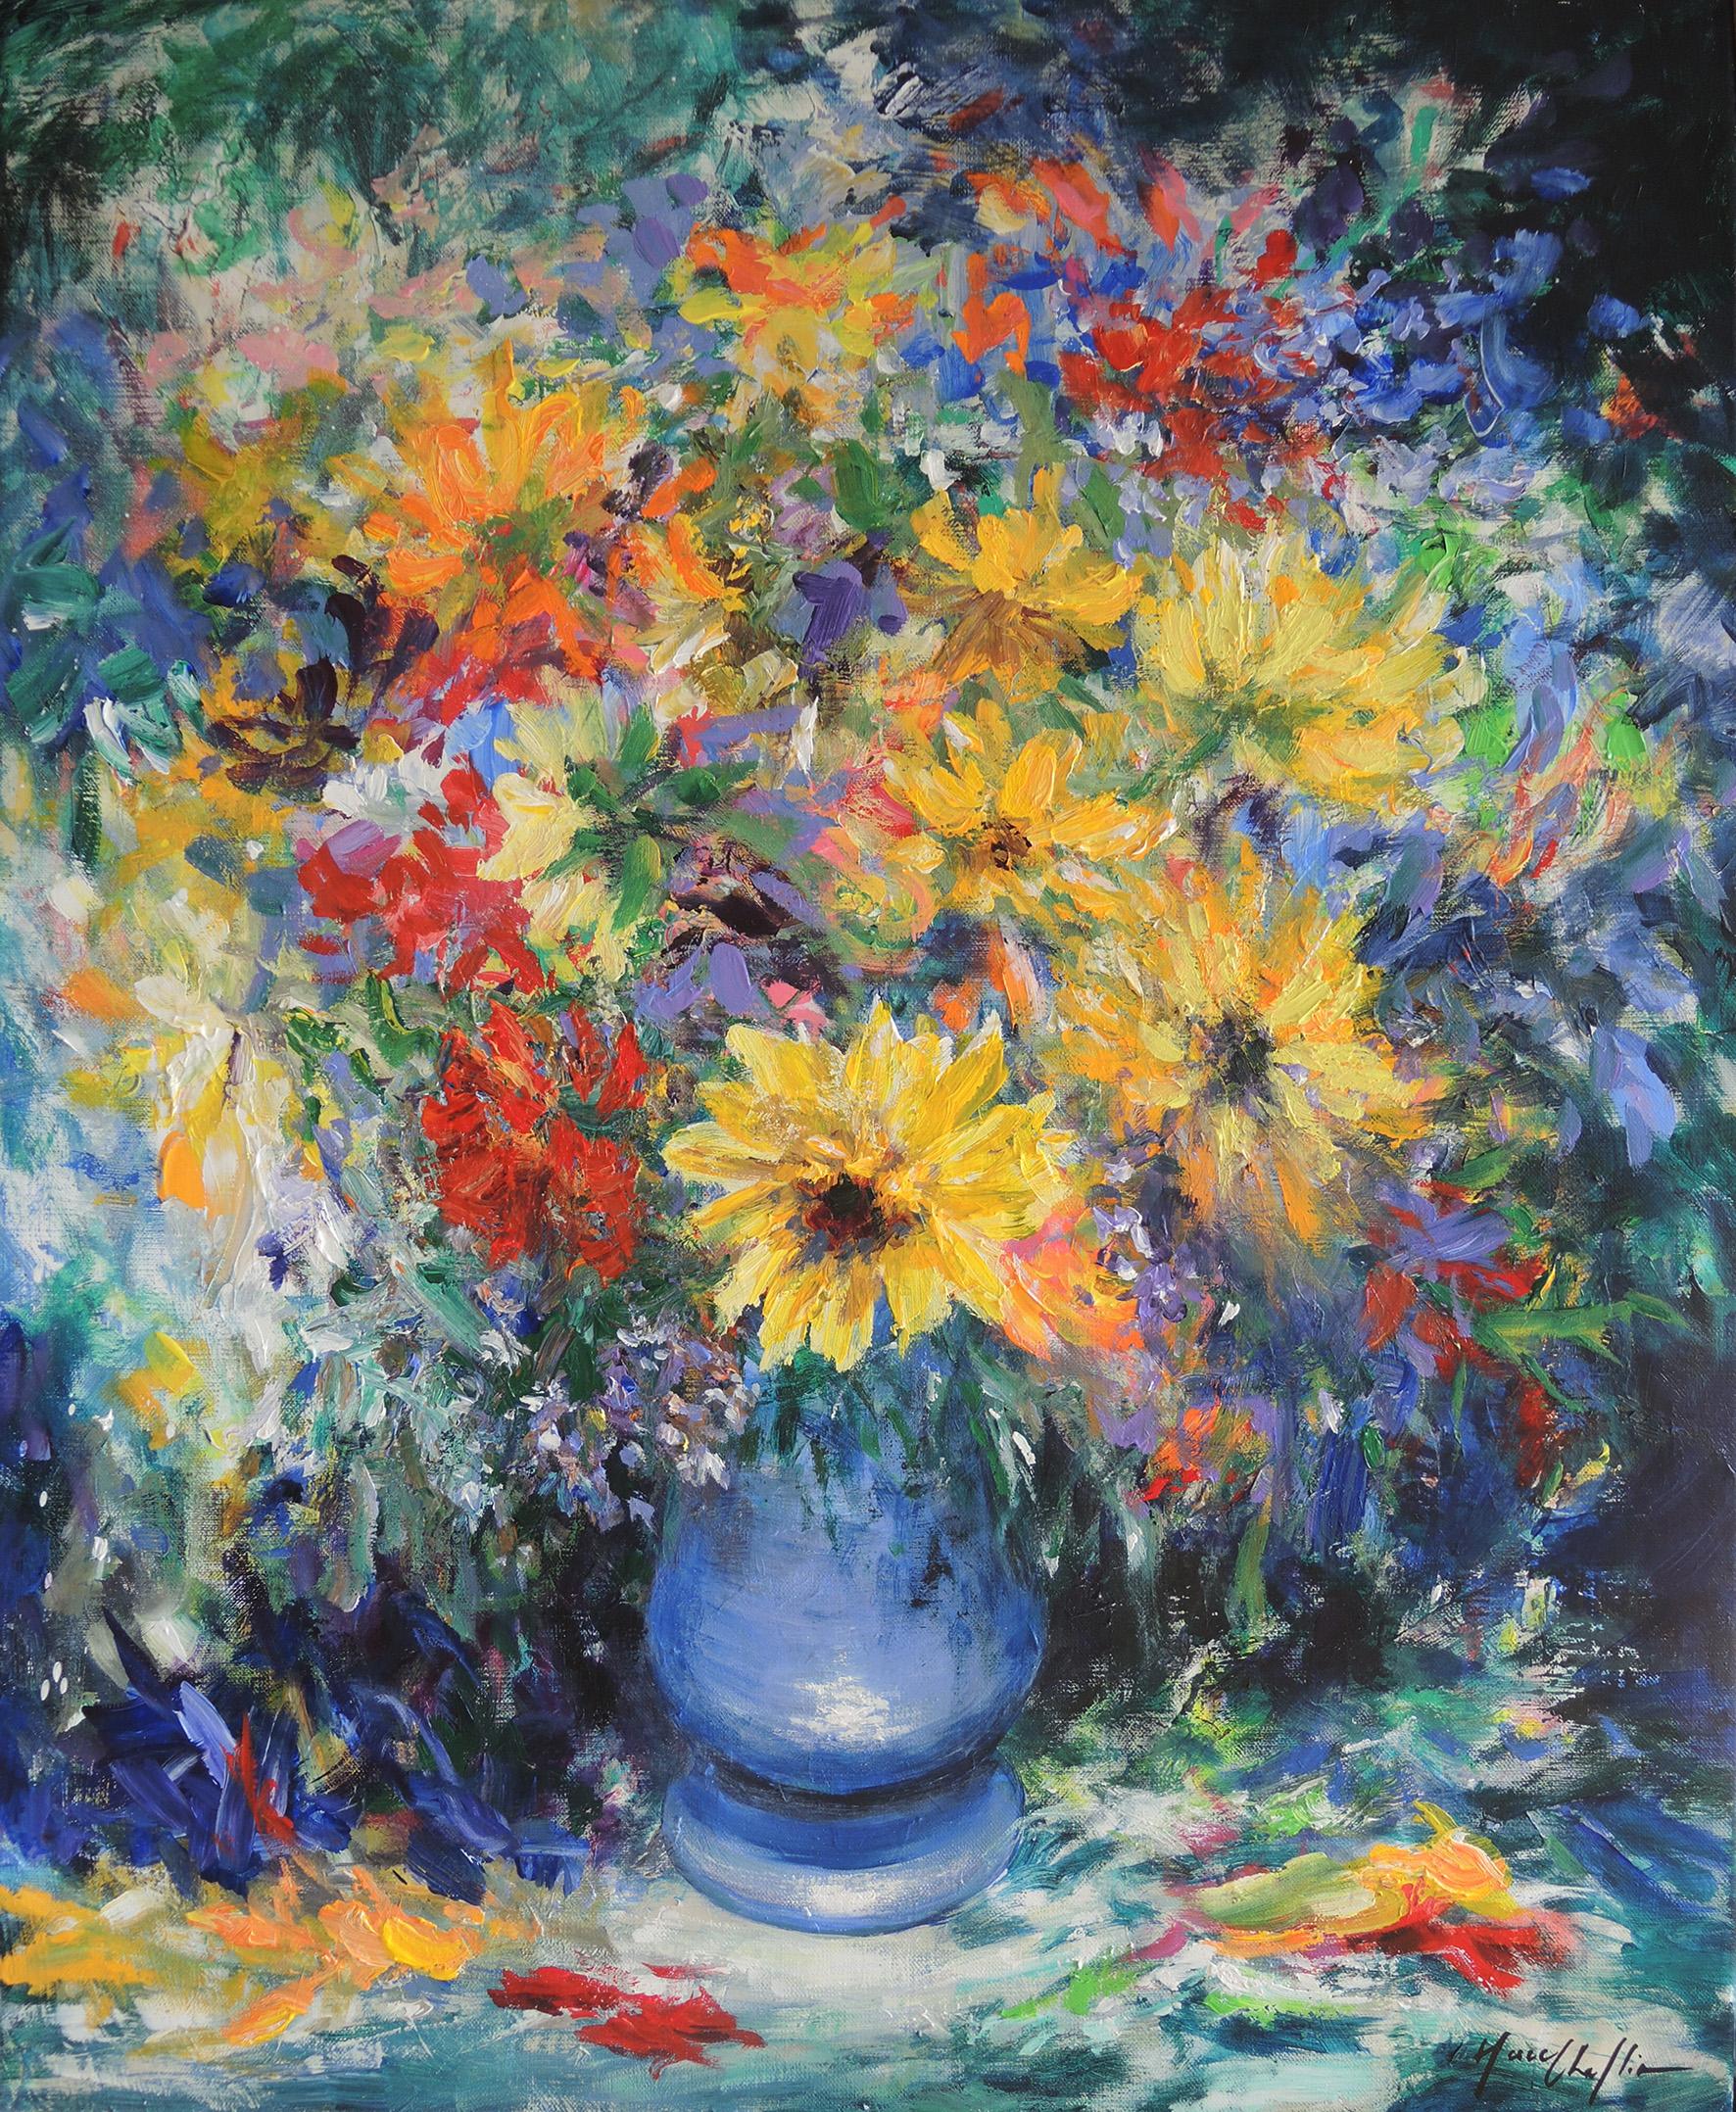 September glory, bouquet in a yellow vase and Autumn glory Diptych
Overall size : H146 x W120

September glory, bouquet in a yellow vase by Mary Chaplin [2021]
original
acrylic on linen canvas
Image size: H:73 cm x W:60 cm
Complete Size of Unframed